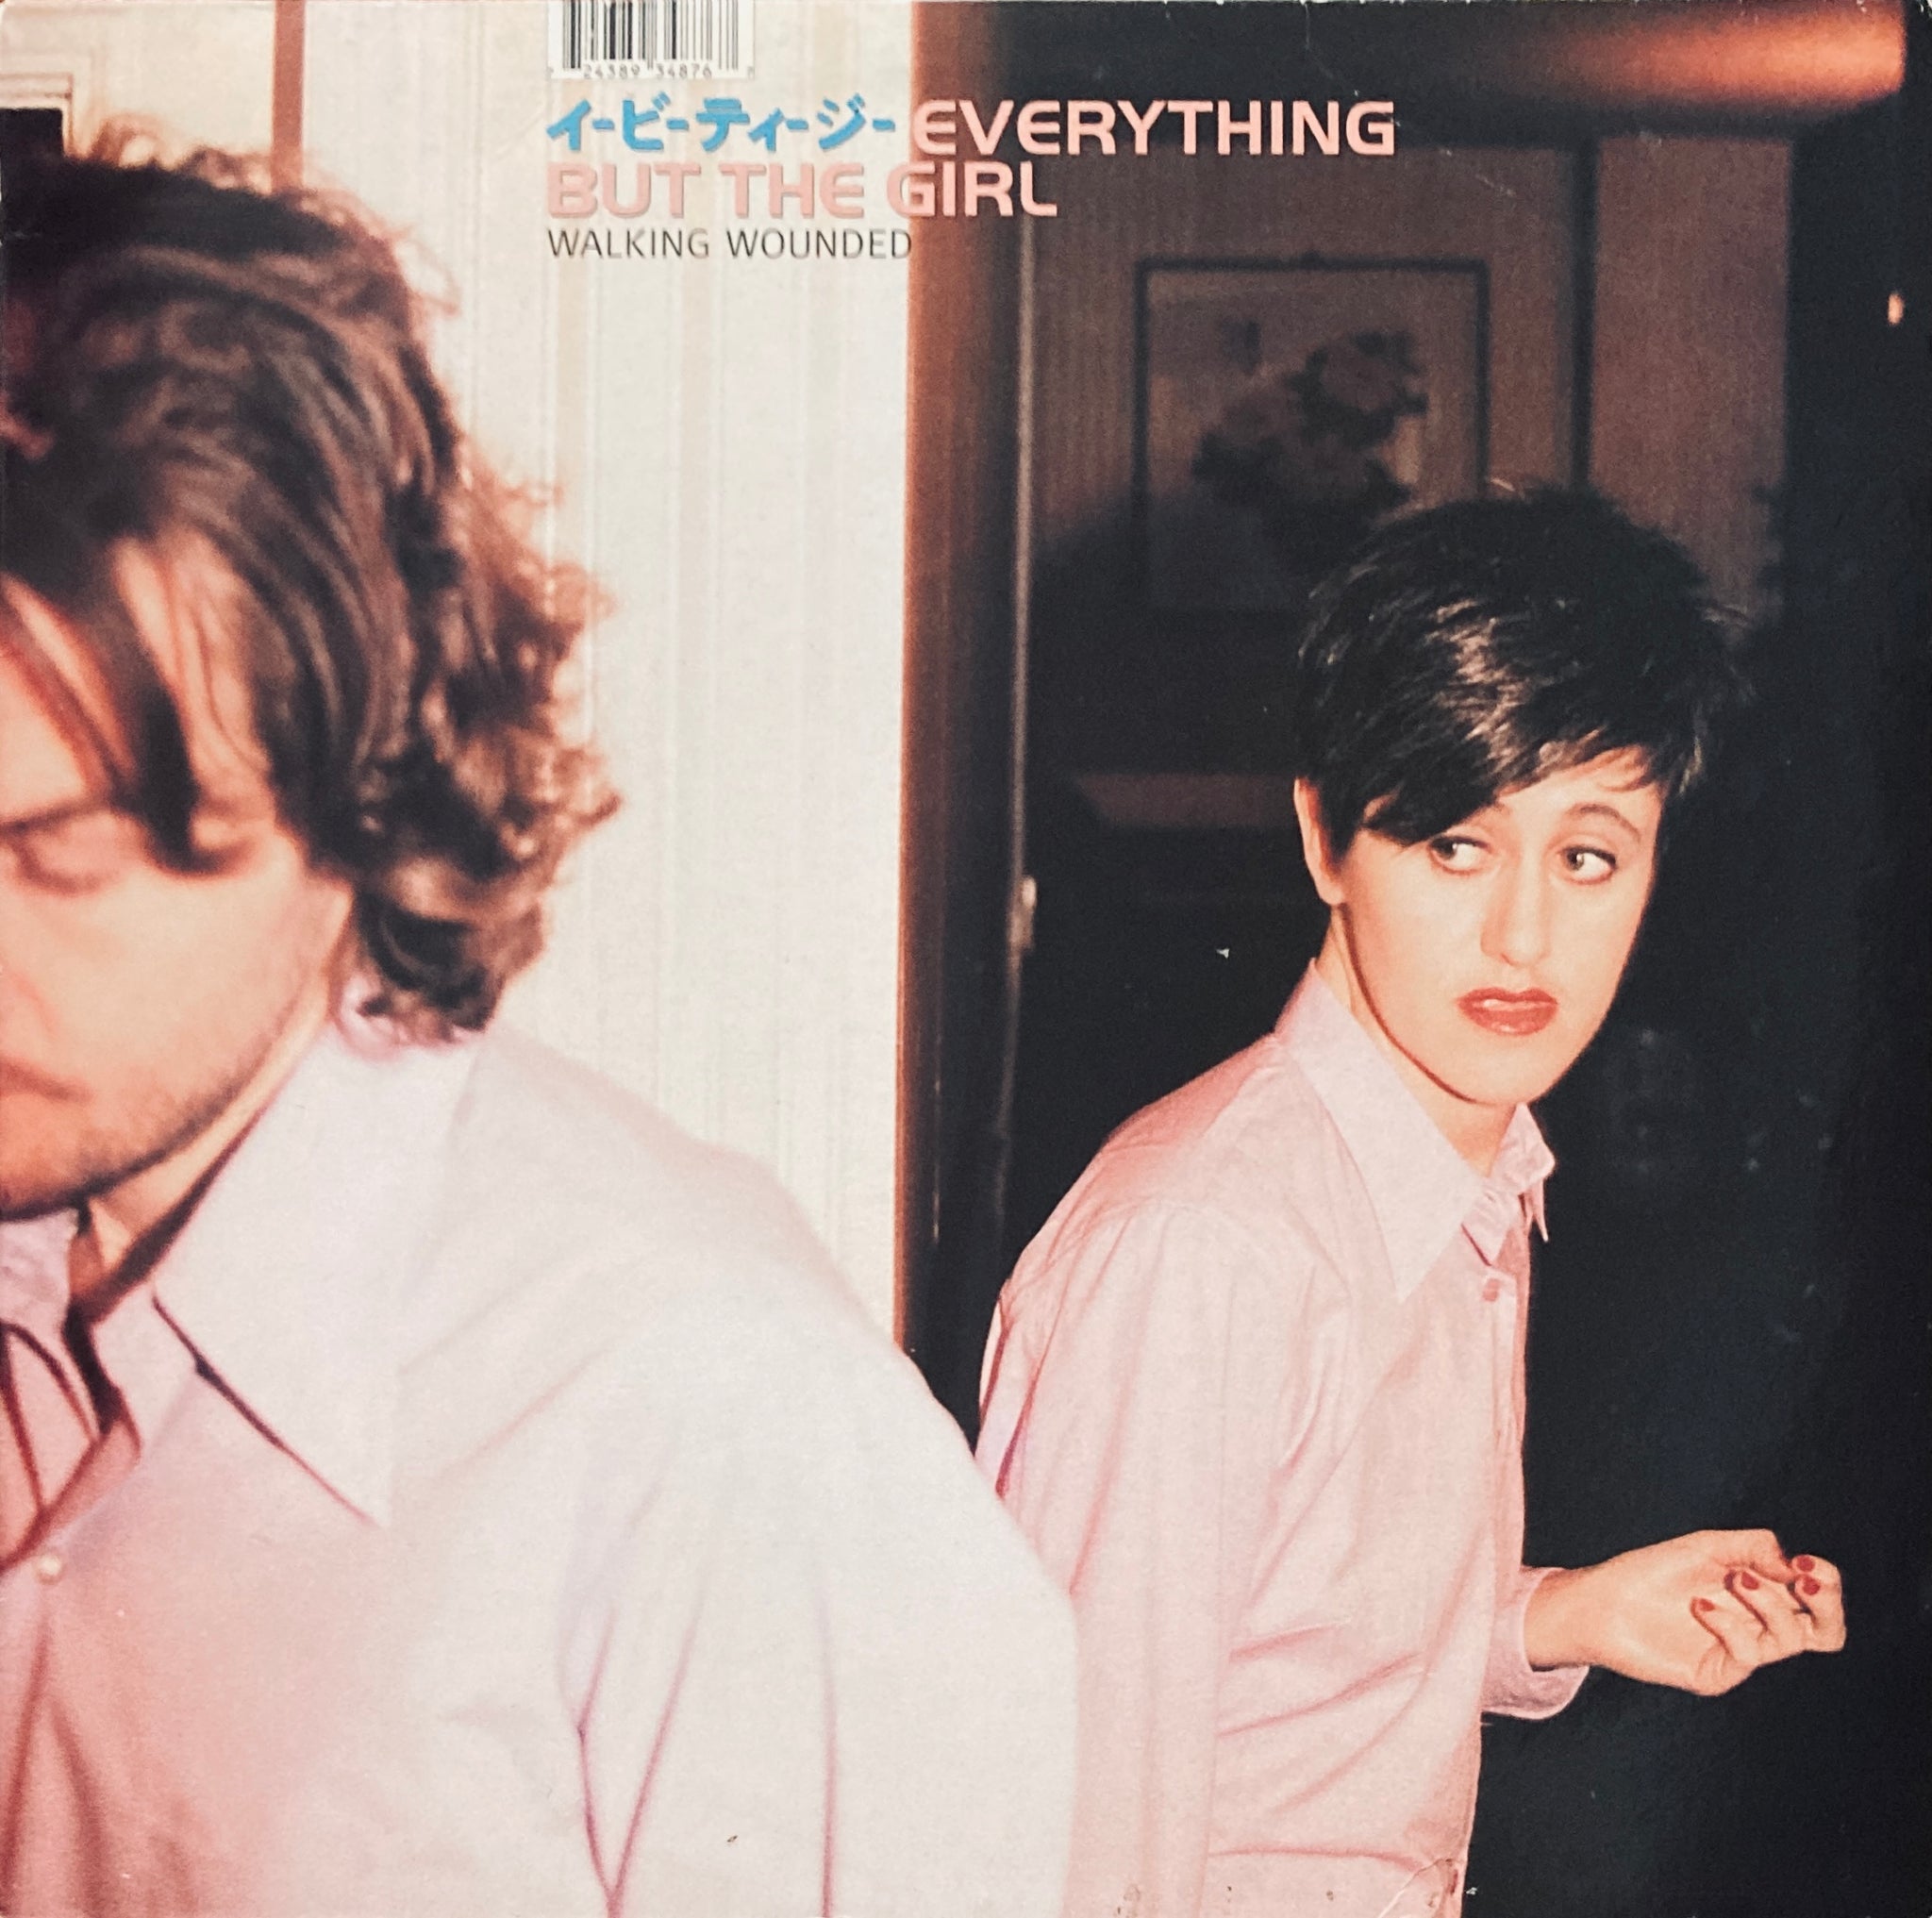 Everything But The Girl "Walking Wounded" 12" Single (1996)